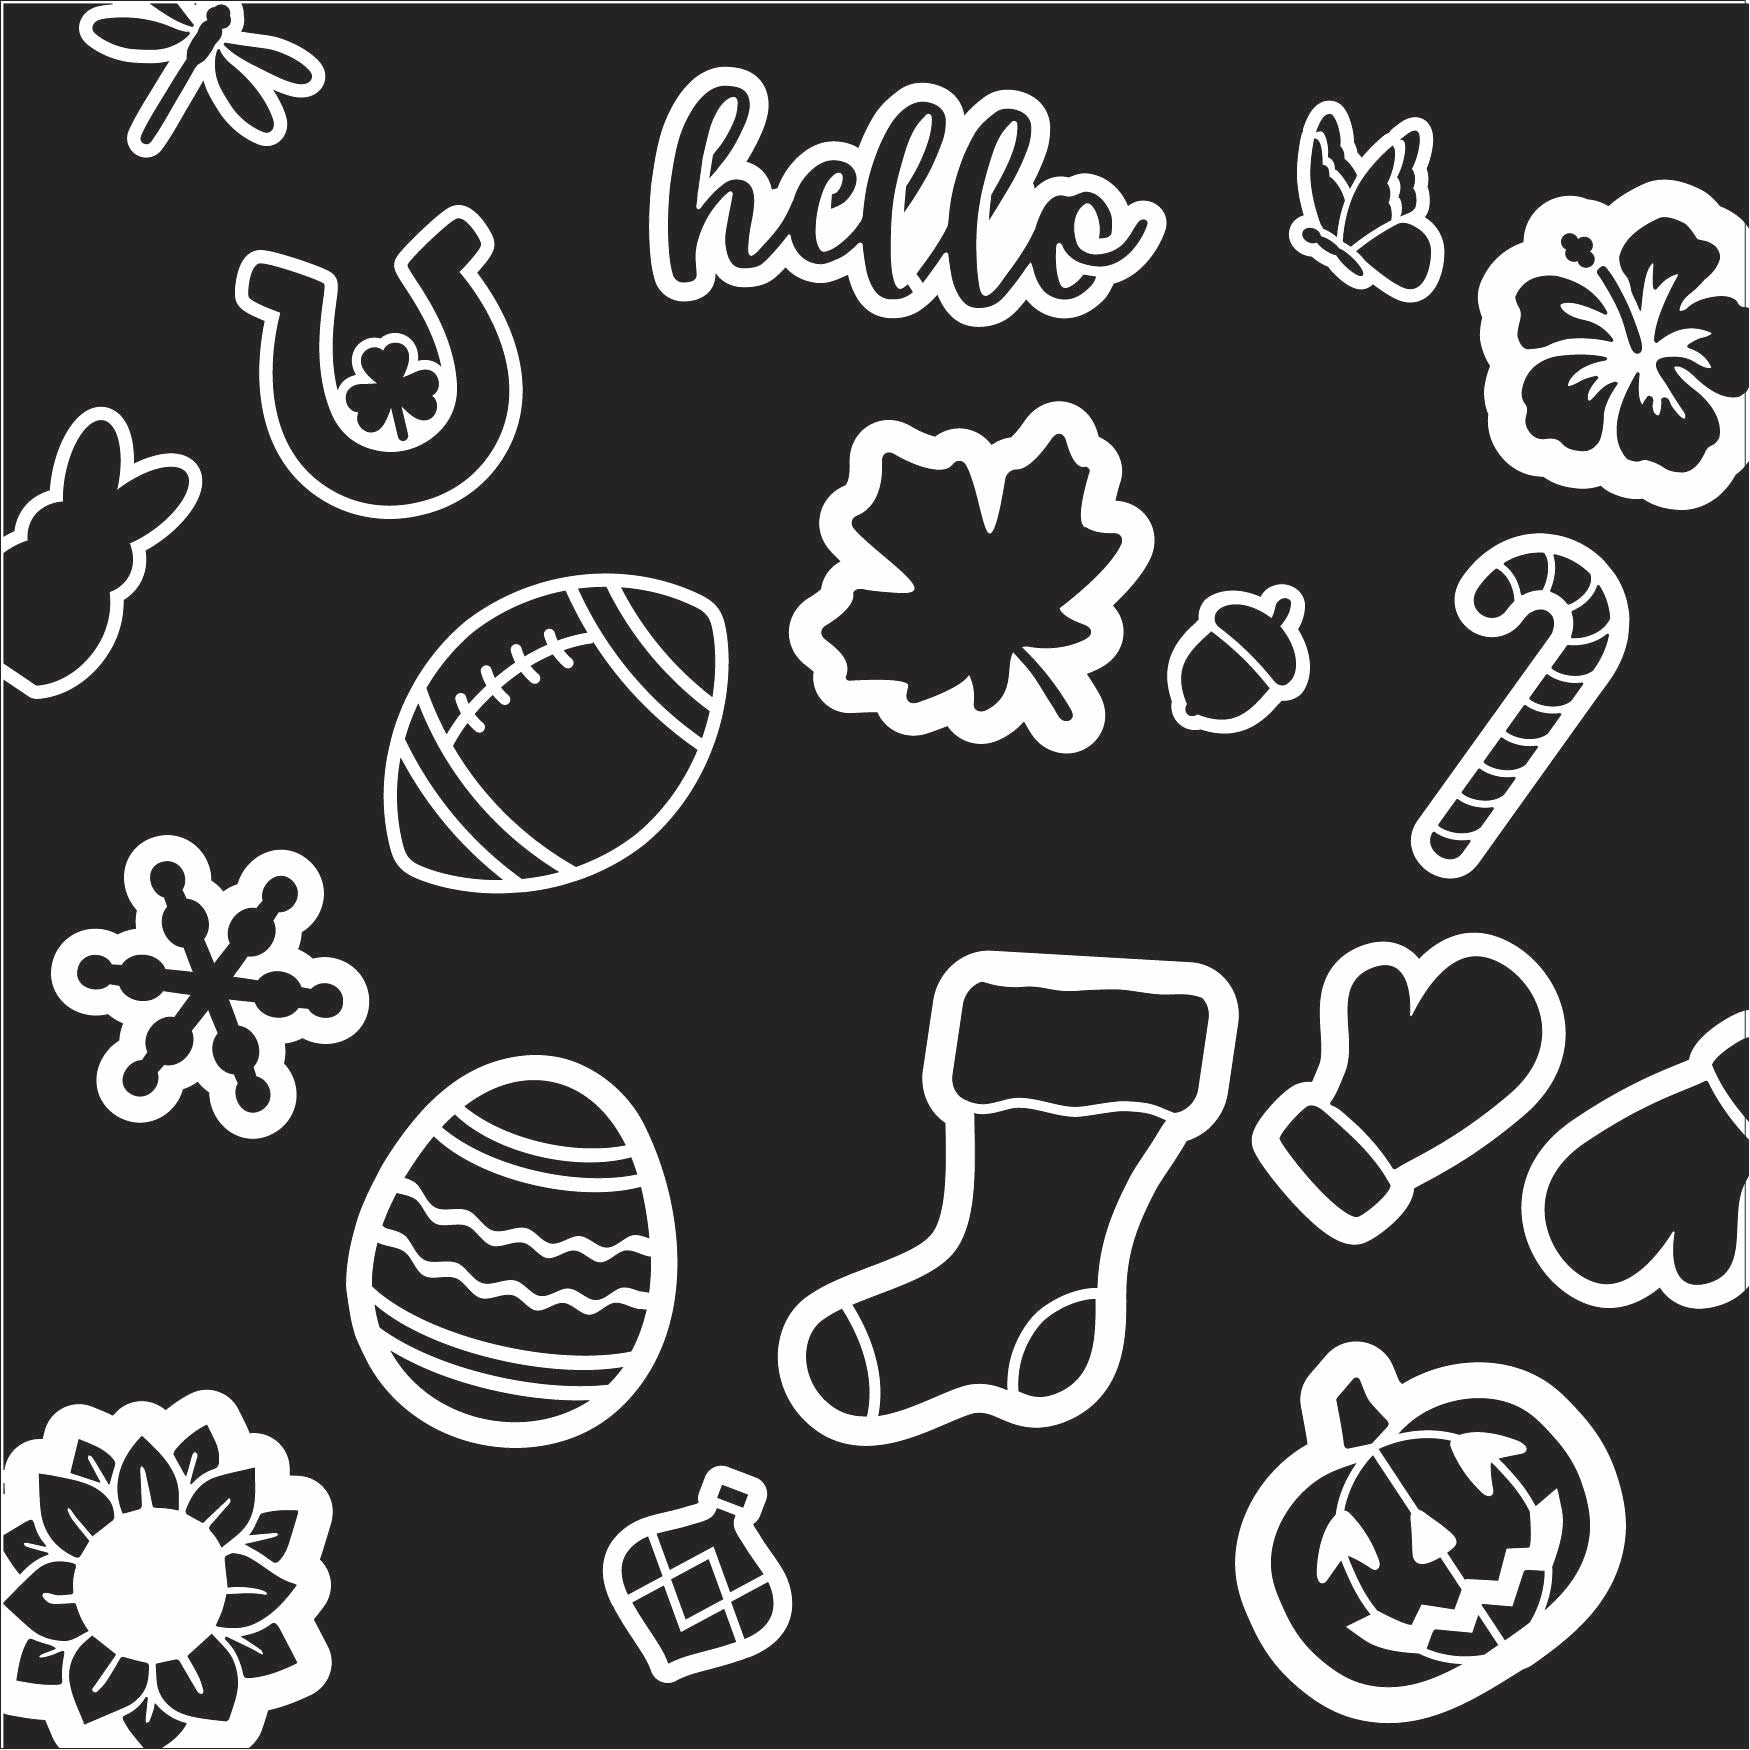 Plata magnetic reusable stencil designs for chalkboard art and chalkboard lettering for easy holiday crafts